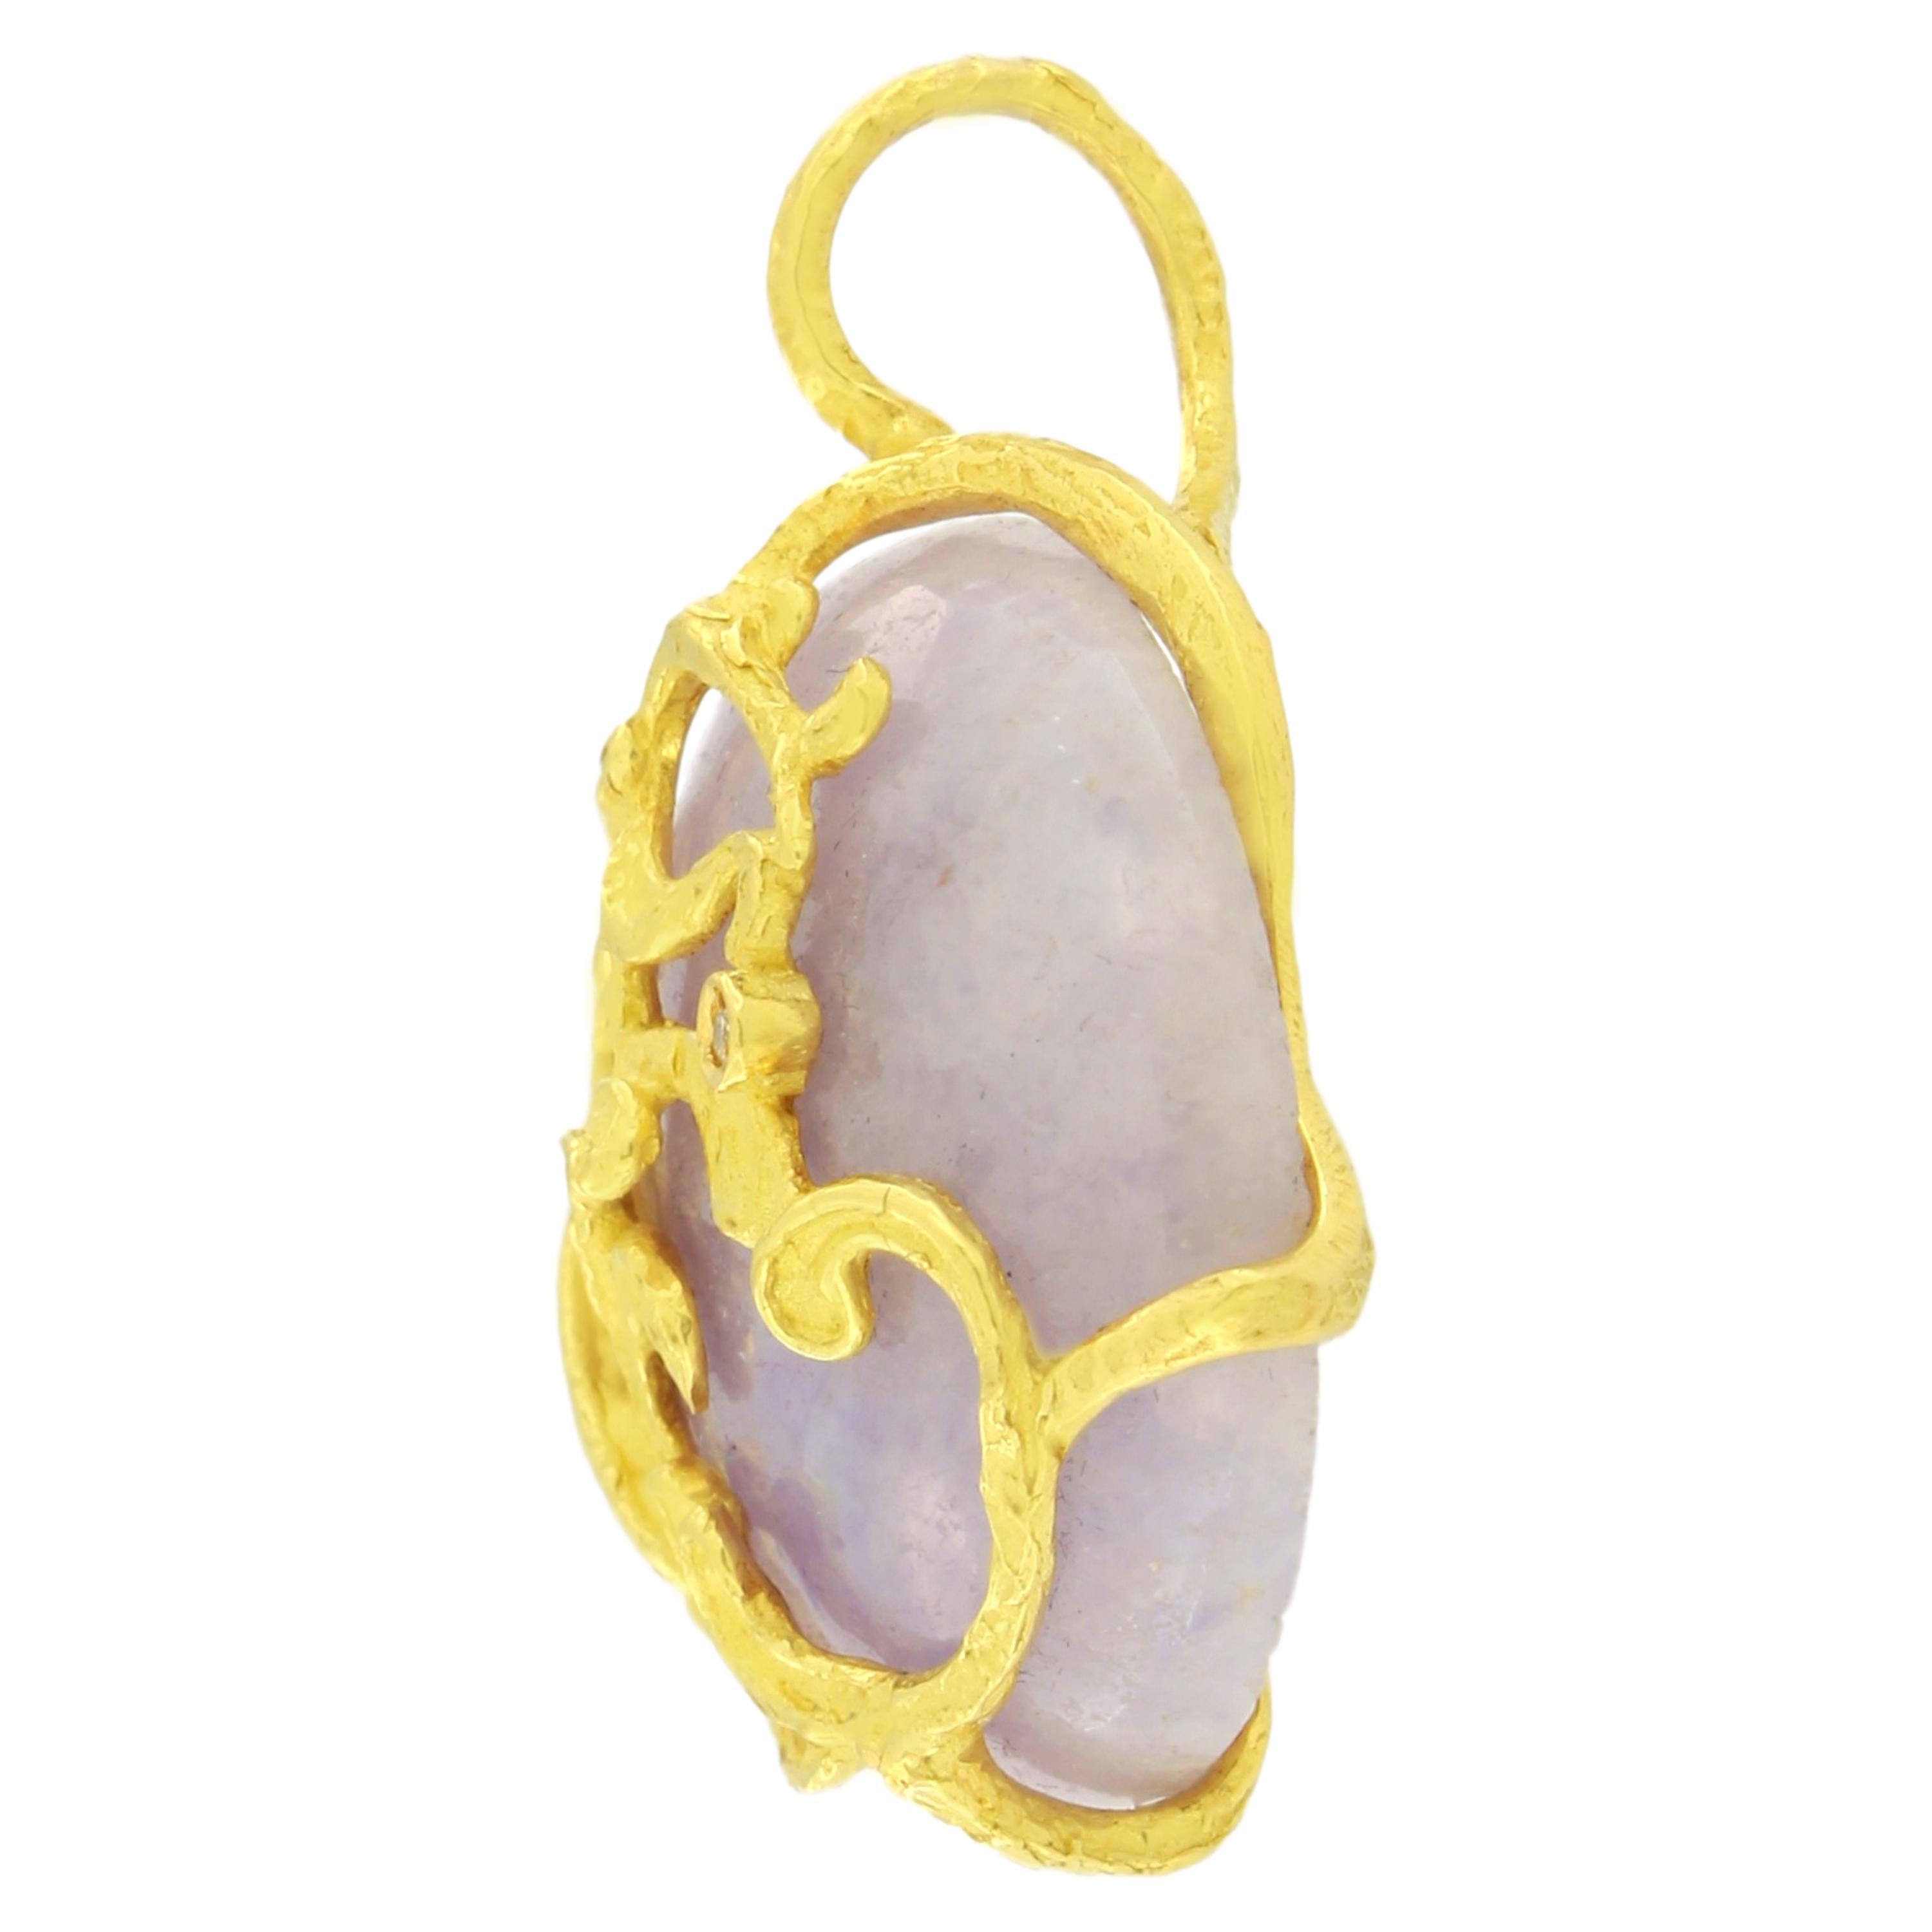 Exquisite Lavender Jade Gemstone Satin Yellow Gold Pendant Necklace embellished with White Diamond, from Sacchi’s “Burlesque” Collection, hand-crafted with lost-wax casting technique.

Lost-wax casting, one of the oldest techniques for creating